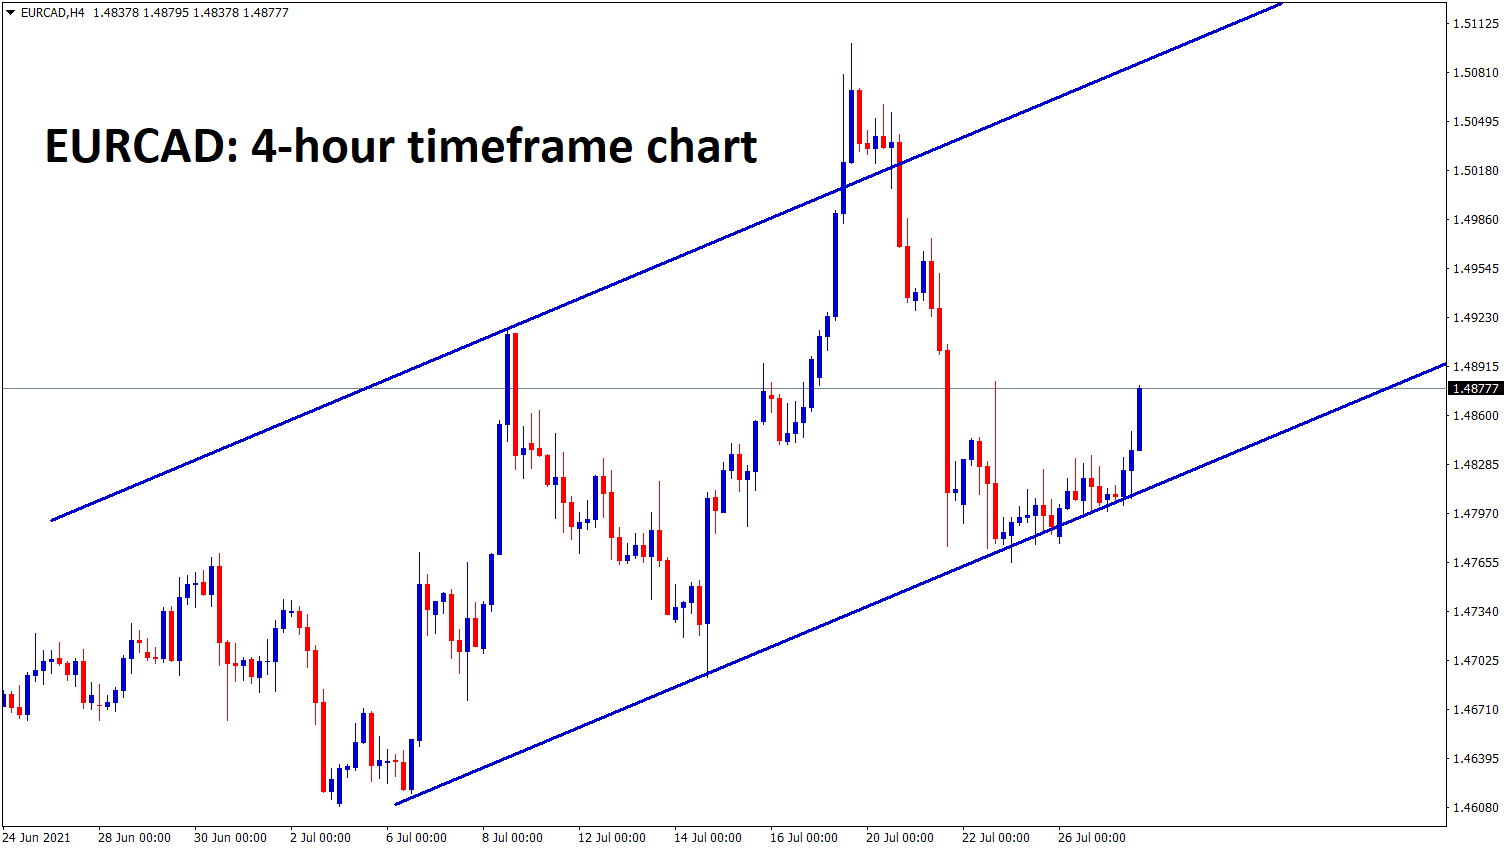 EURCAD is moving in an uptrend line in the 4hour chart